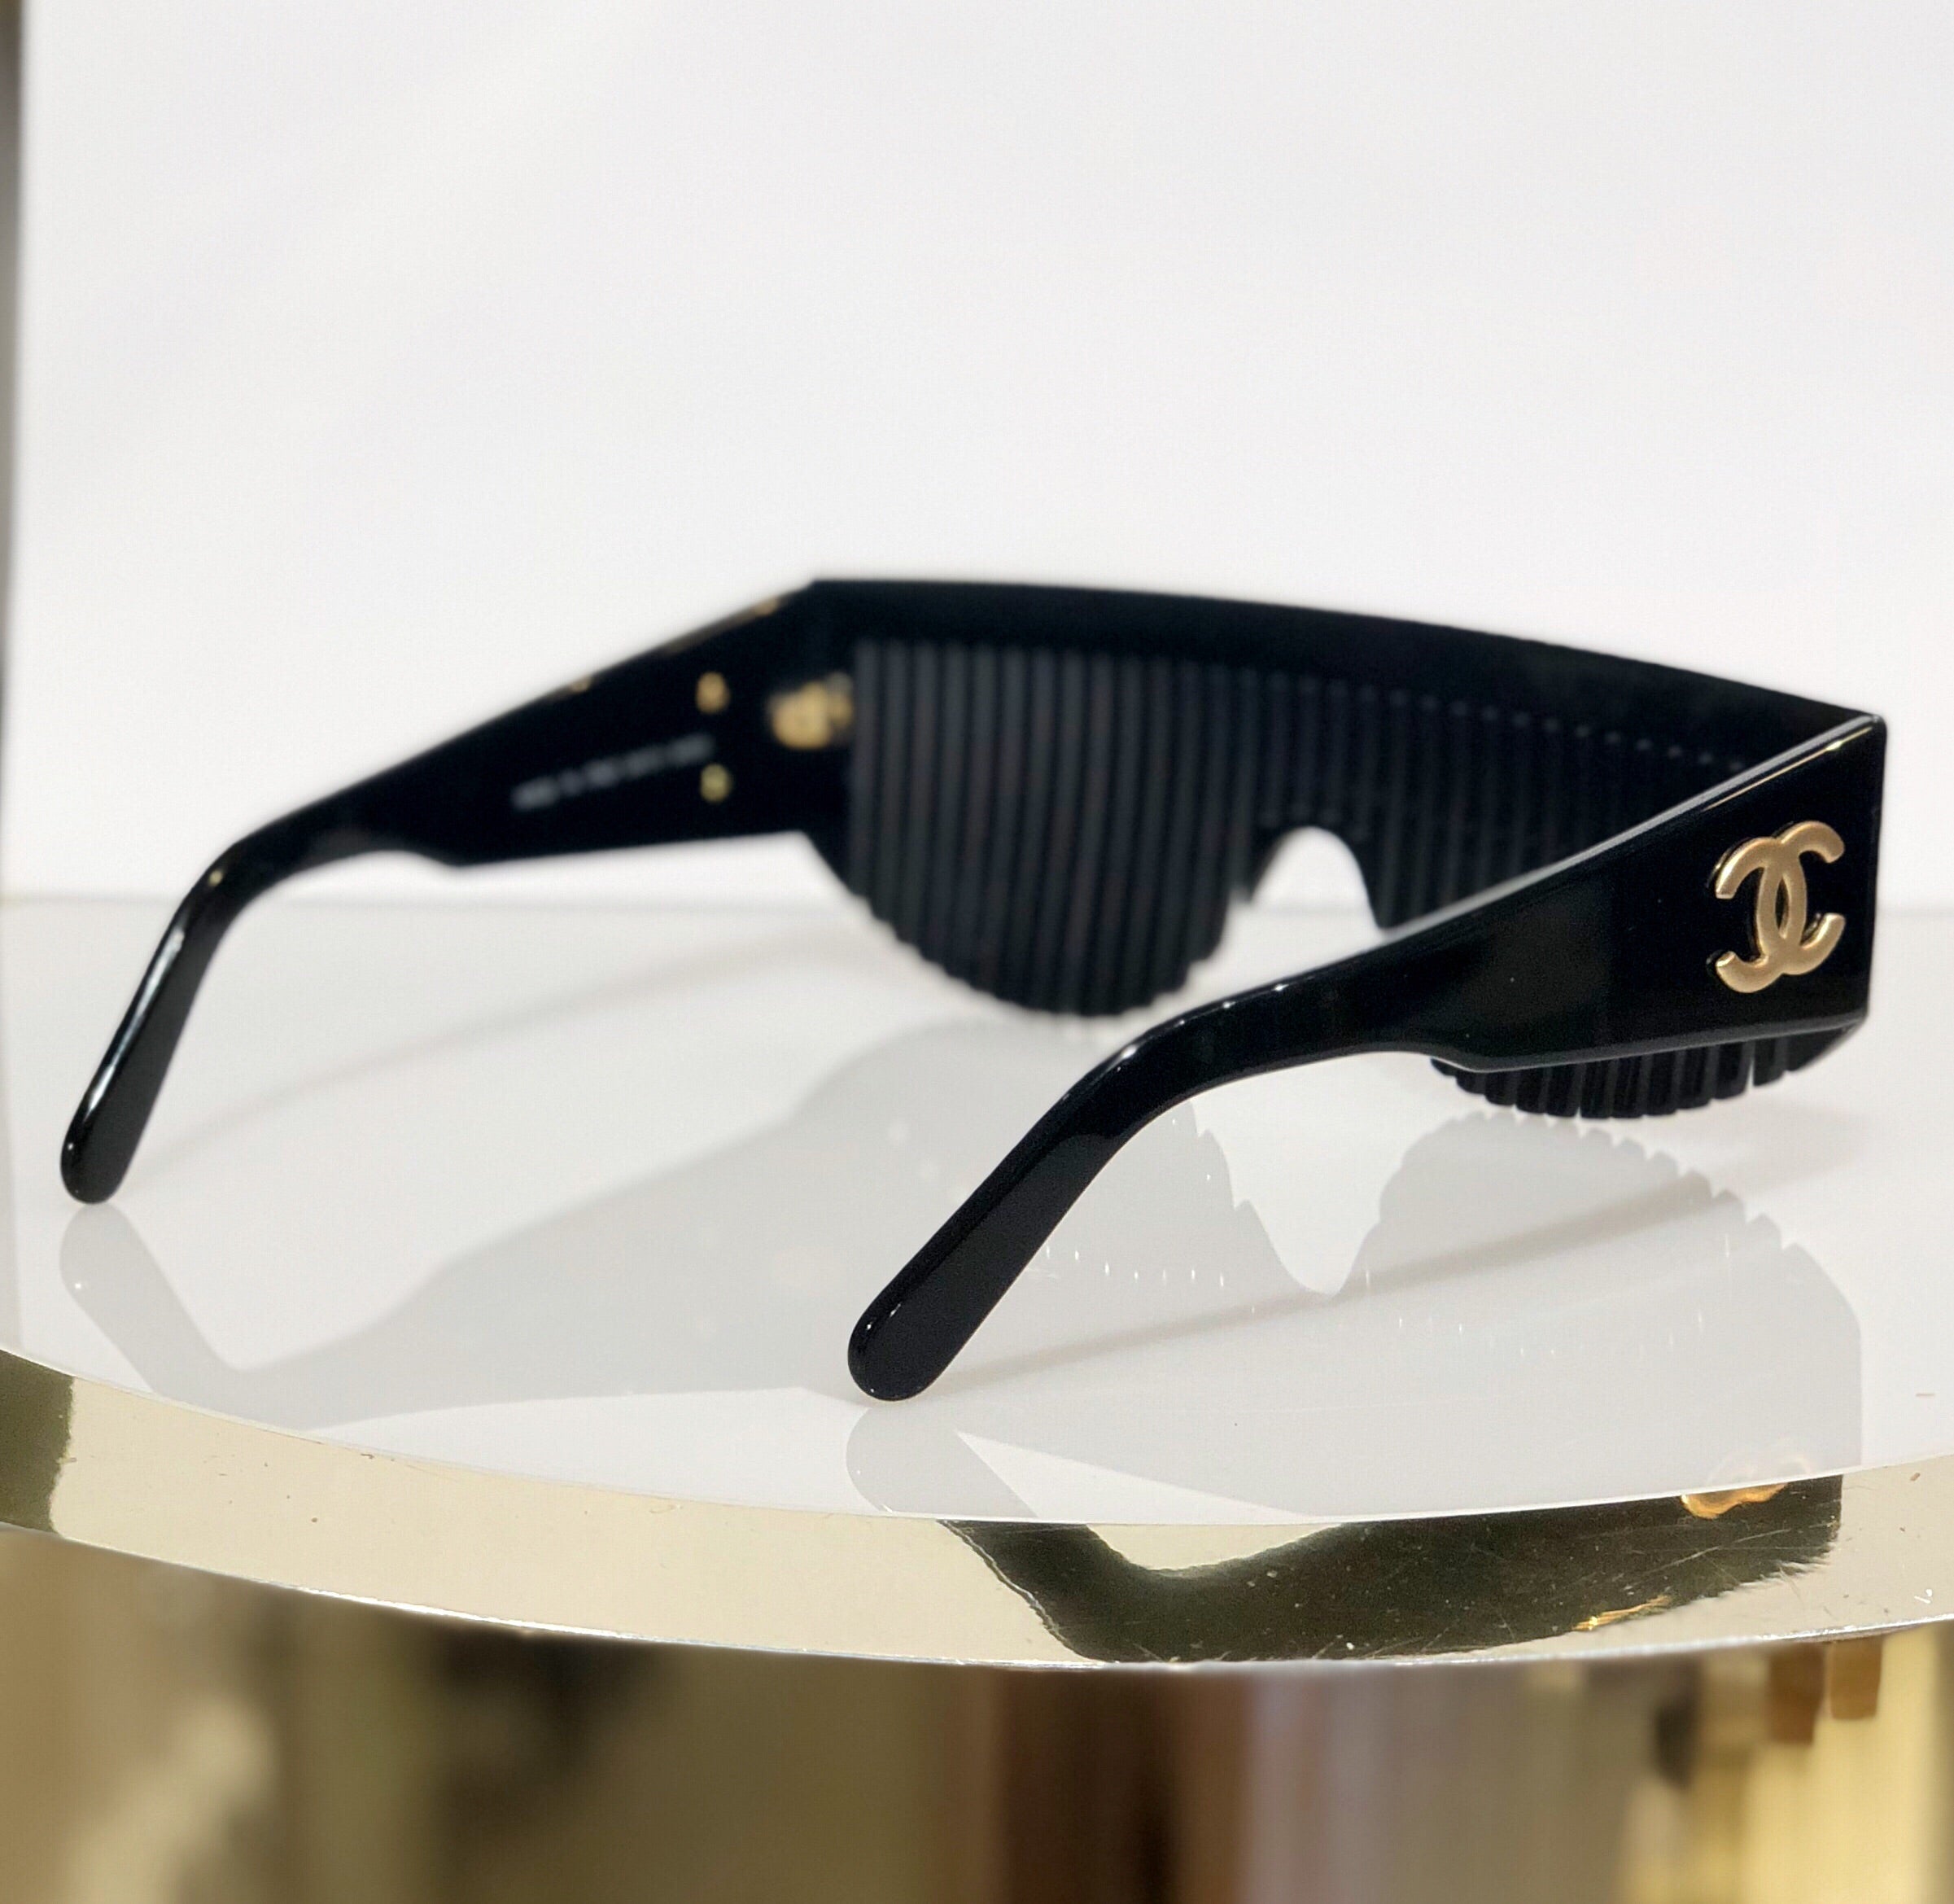 Vintage CHANEL 1993 Runway Sunglasses at Rice and Beans Vintage